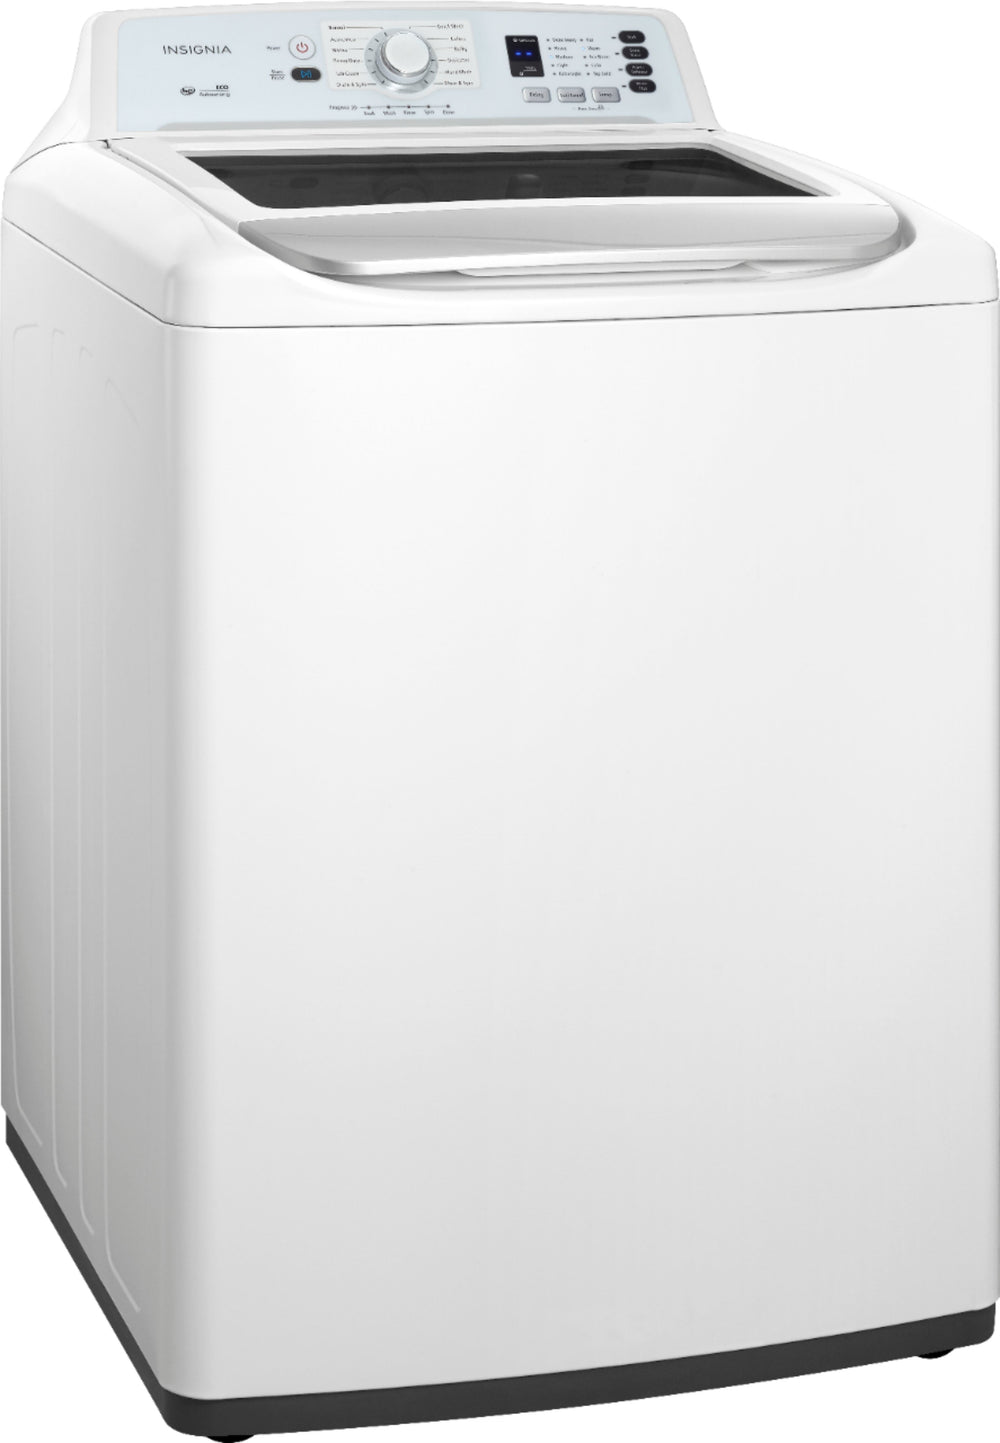 Insignia™ - 4.1 Cu. Ft. High Efficiency Top Load Washer - White_1